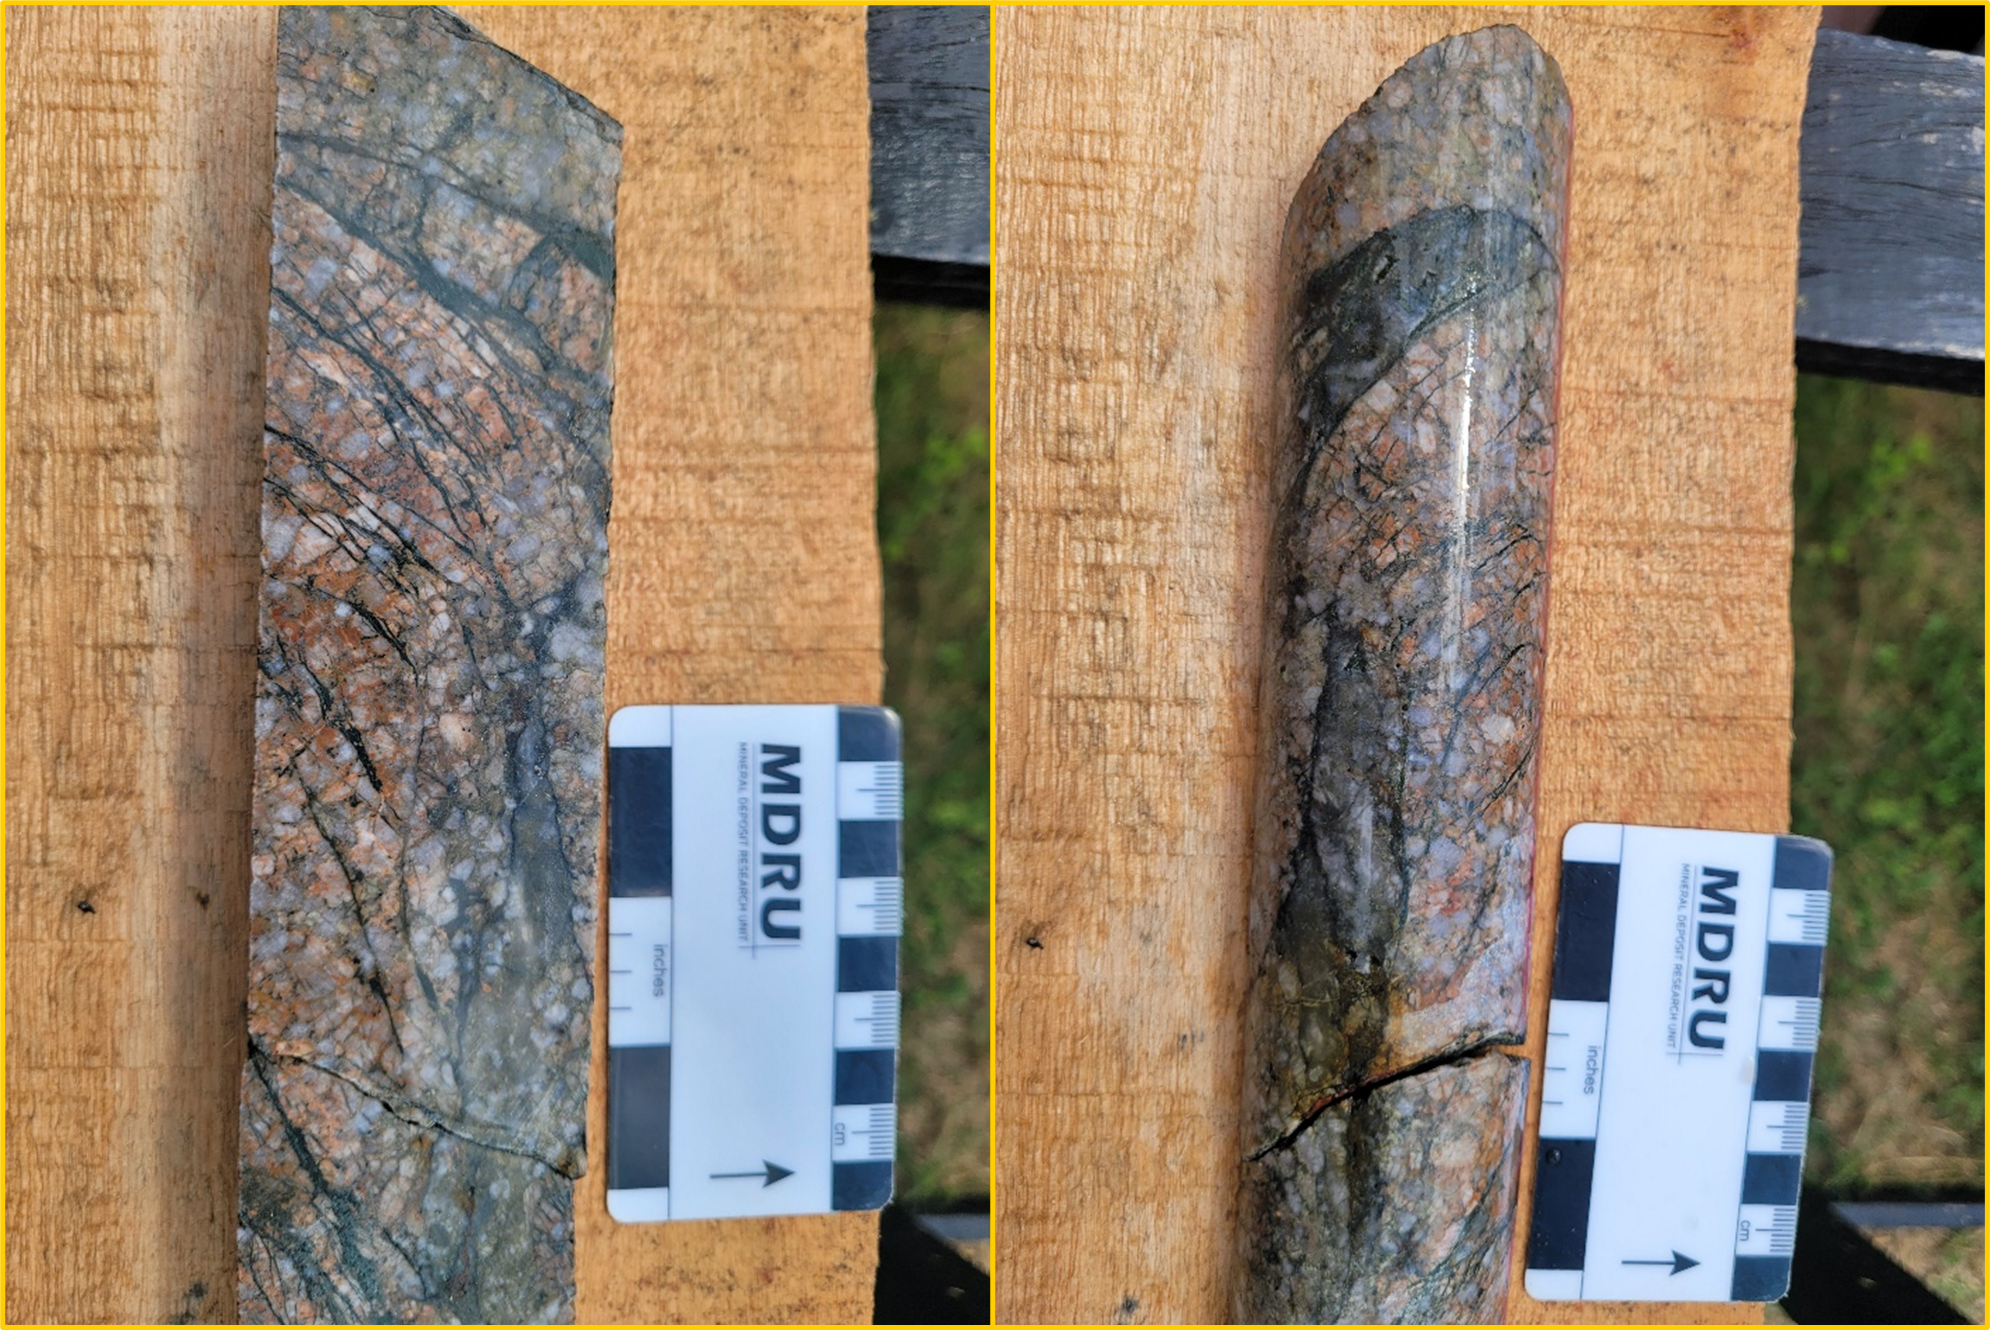 Drillhole 22BT002: typical example of hydrothermal breccia from Galvao. Perthitic granite hydrothermal breccia. Interval is from 357.00 metres to 358.00 metres and grades 0.721 g/t gold. Potassic alteration (pink) overprinted by sericite alteration (musky green). Fractures in matrix are infilled by dark green to black chlorite, silica, and disseminated pyrite.